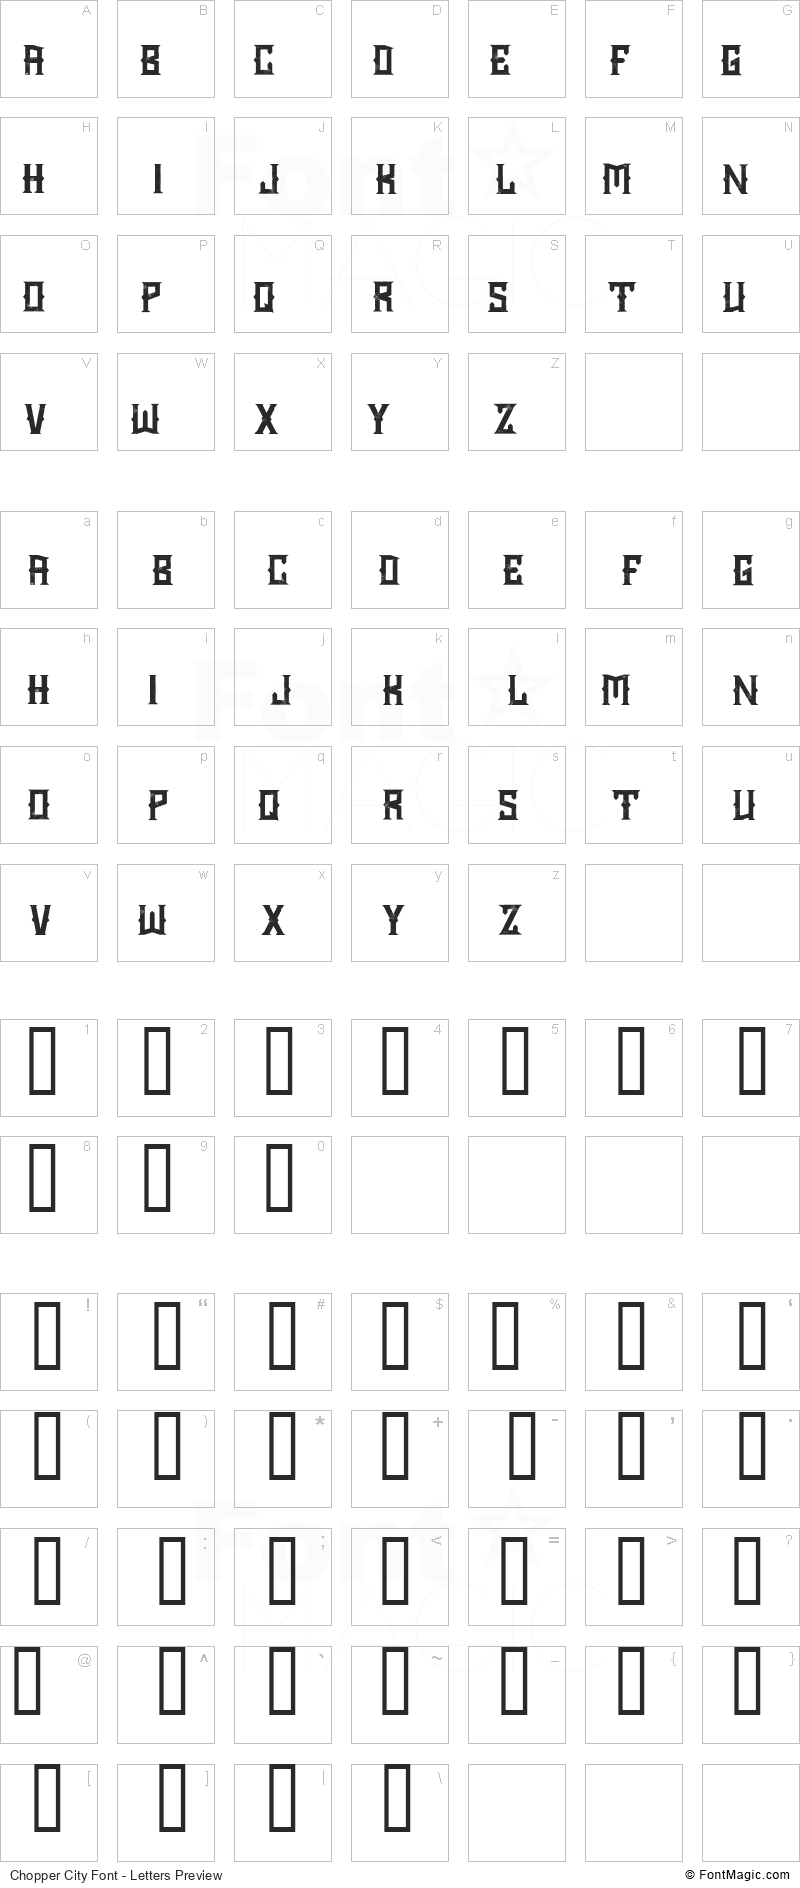 Chopper City Font - All Latters Preview Chart